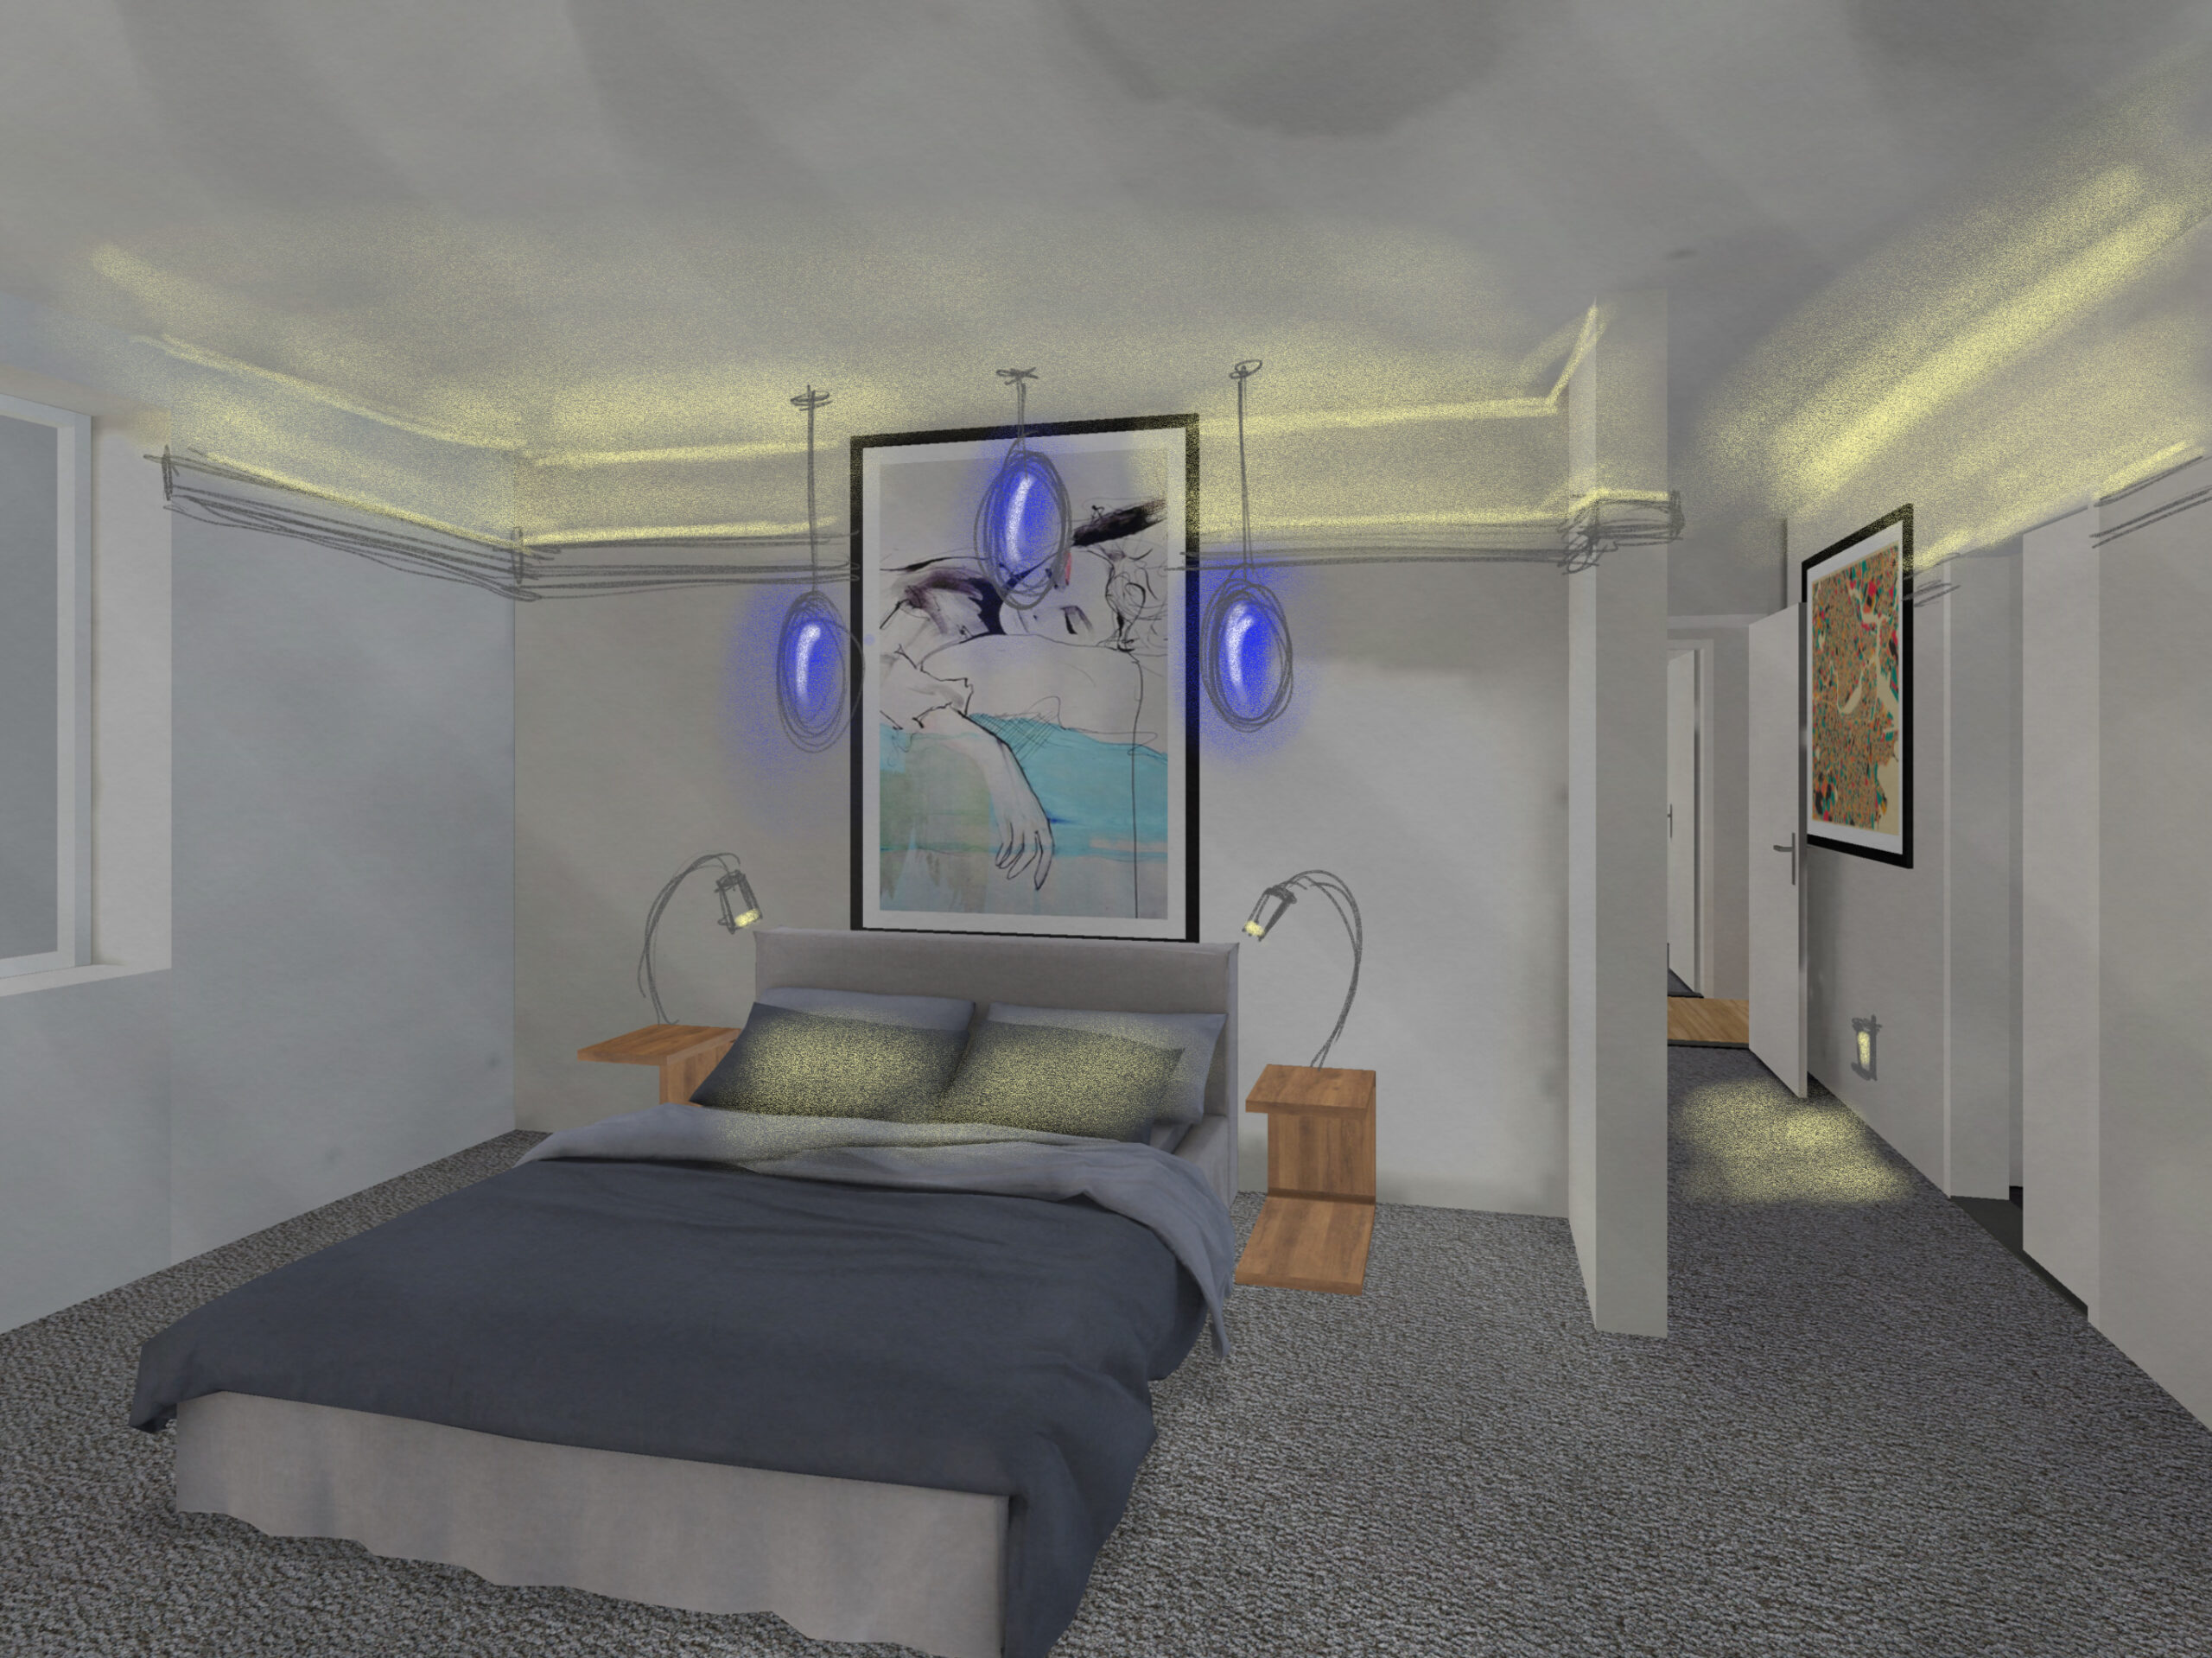 A CAD design of a bedroom with hand drawn lighting features providing places where light can improve the function of the bedroom. The features include three pendants over the pillows on the bed, two night lamps on either side of the bed, a nightlight in the hallway, and cove lighting along the top of the walls